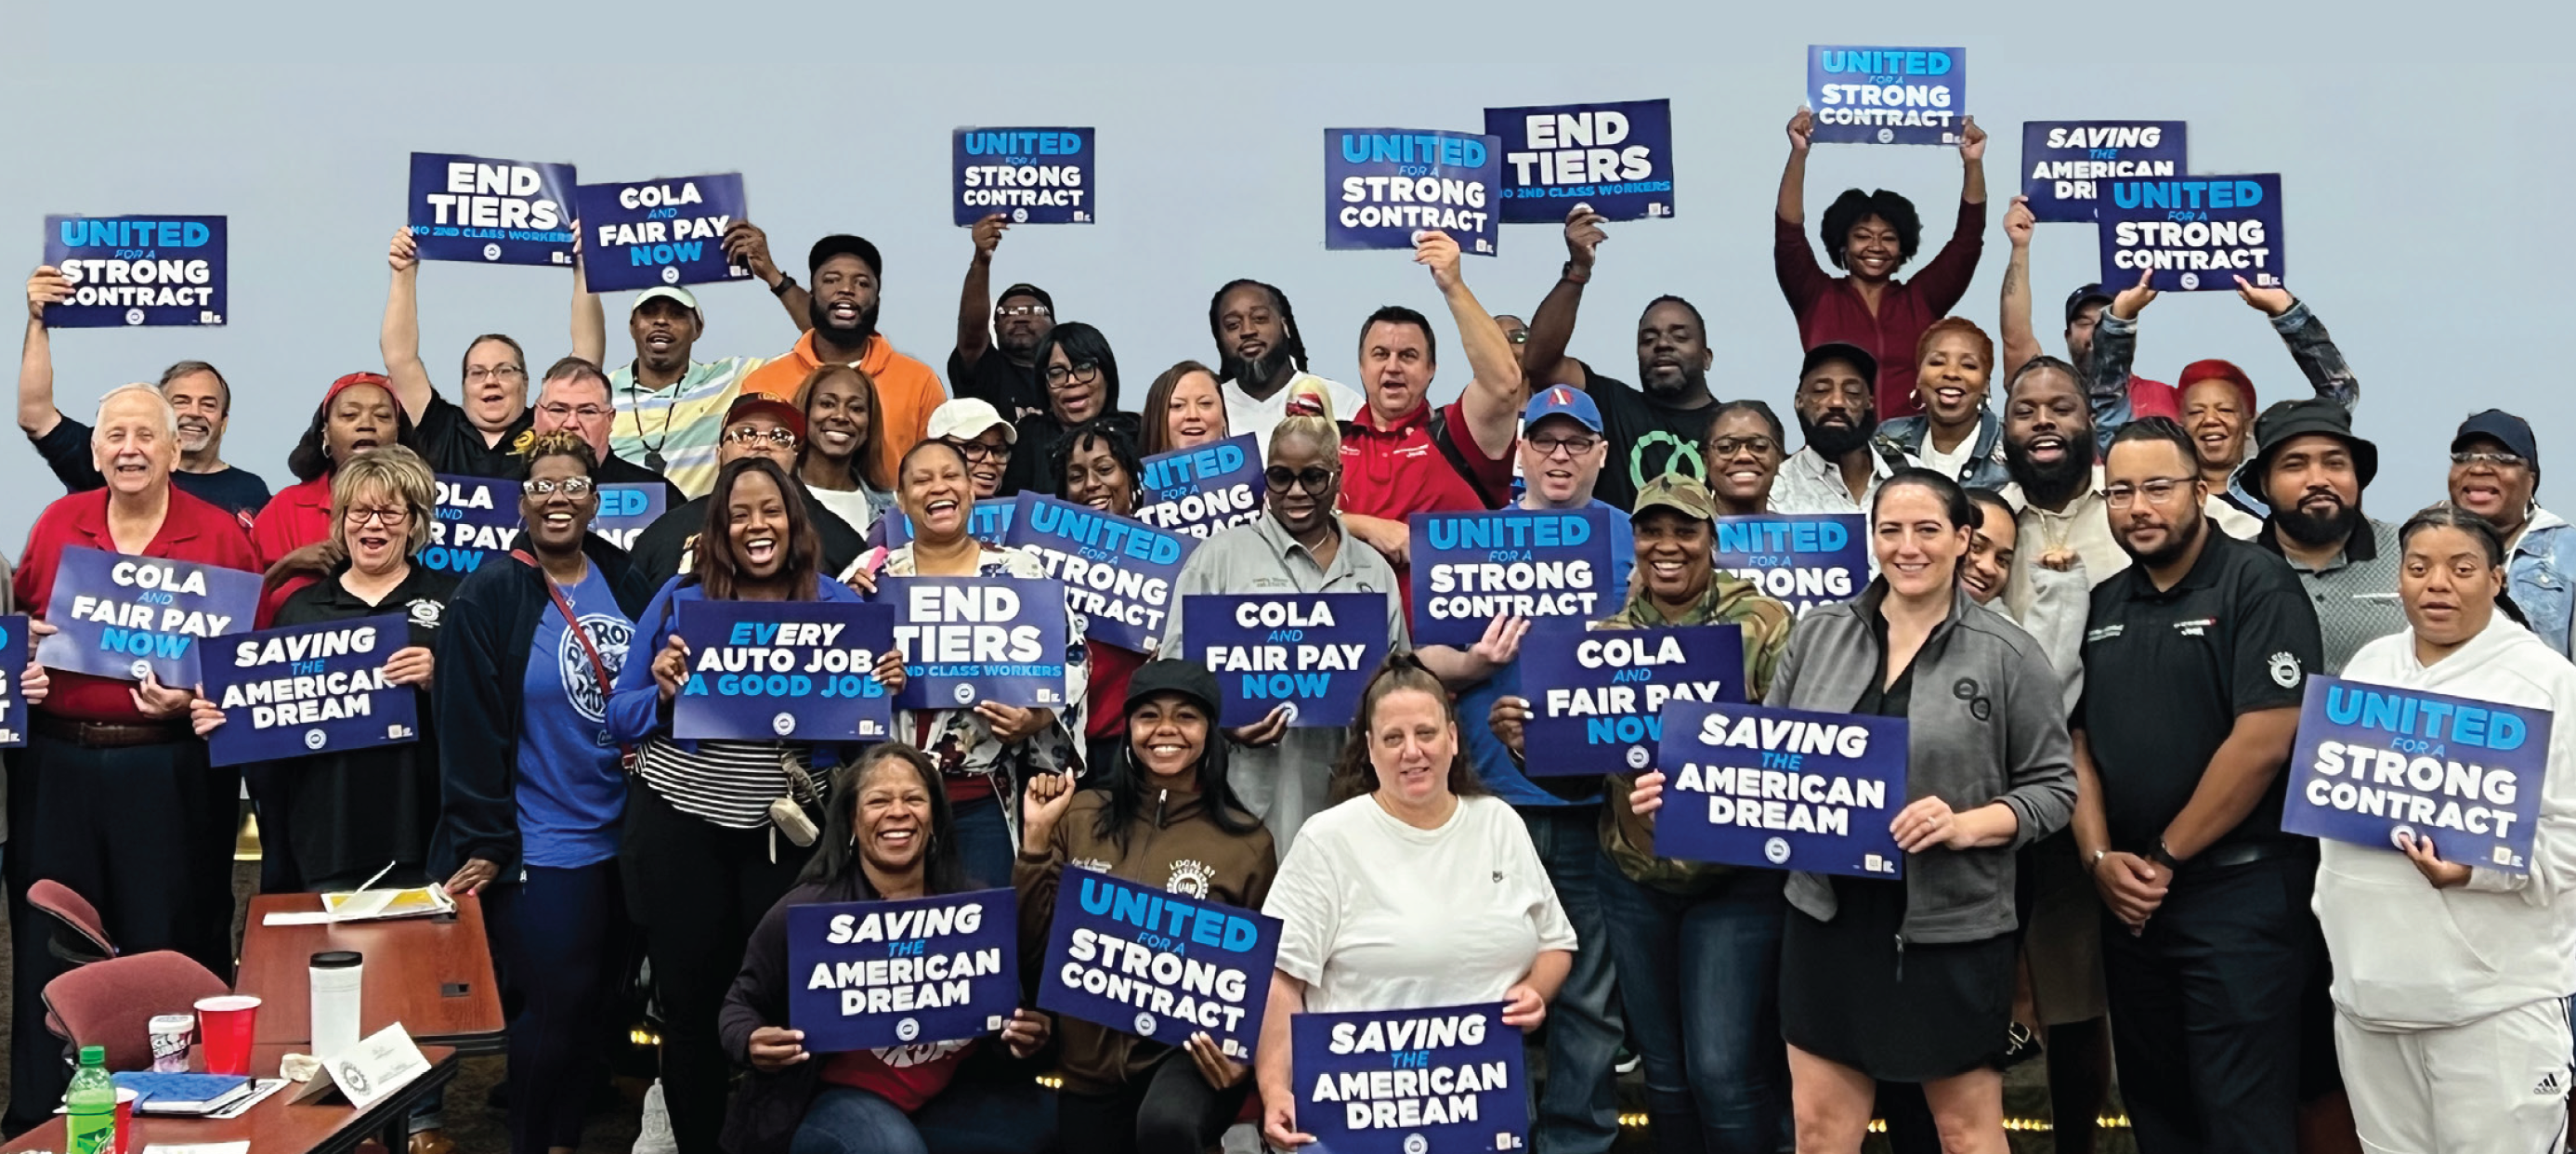 UAW members rally for a fair contract.